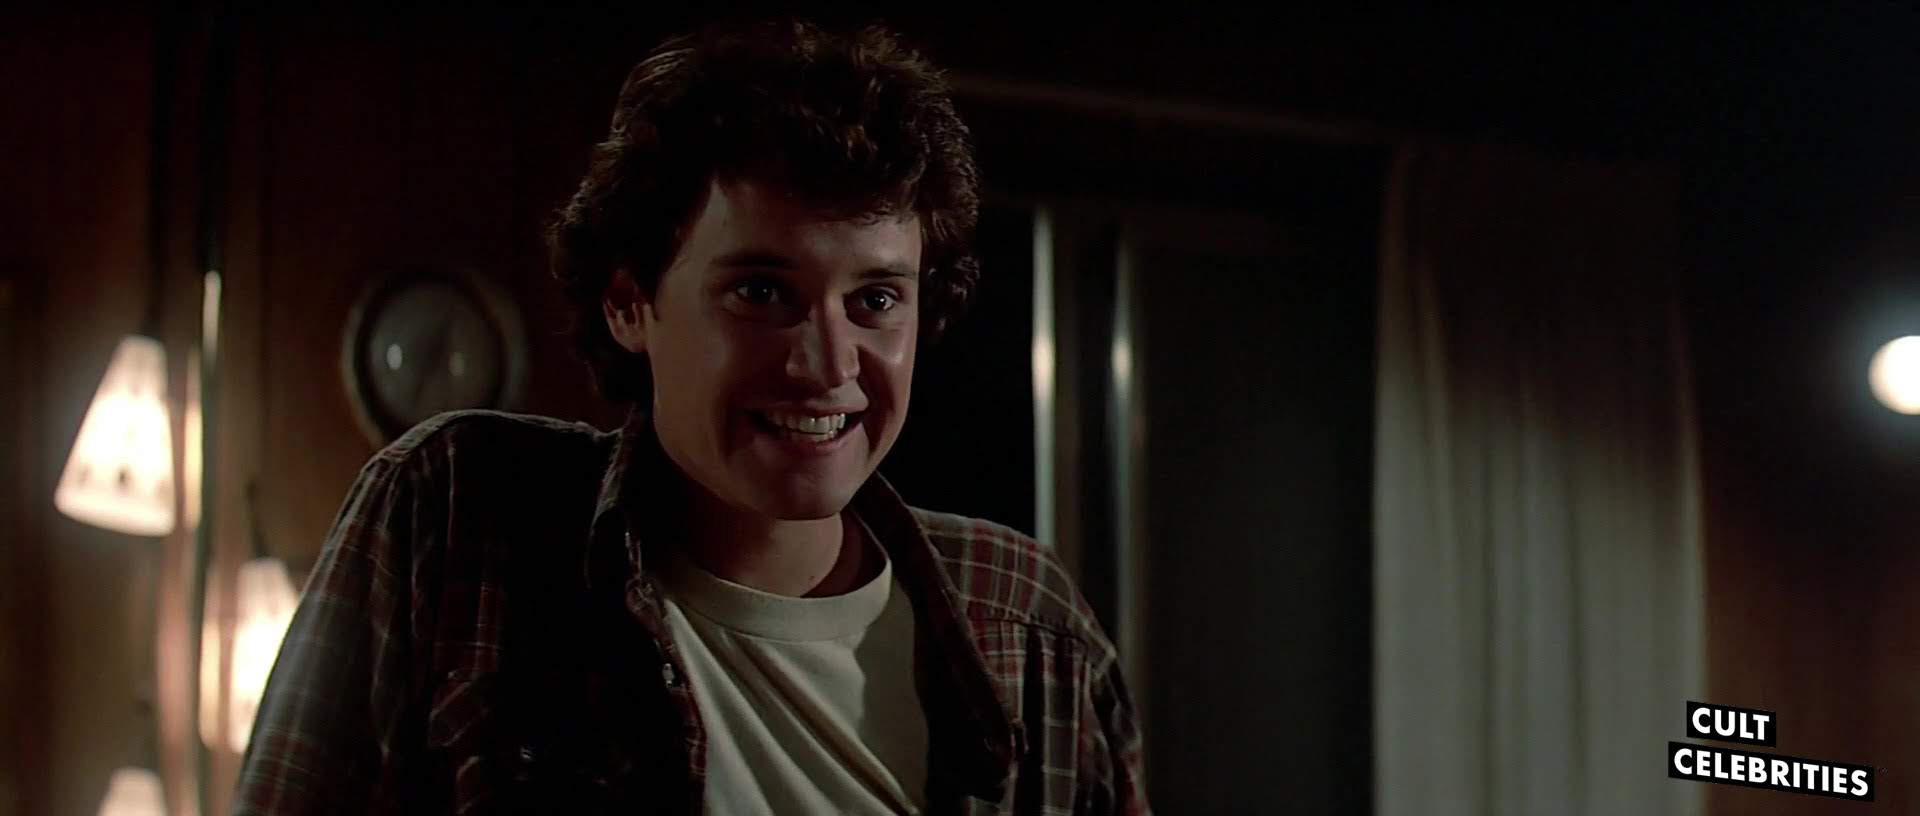 Lance Guest in The Last Starfighter (1984)